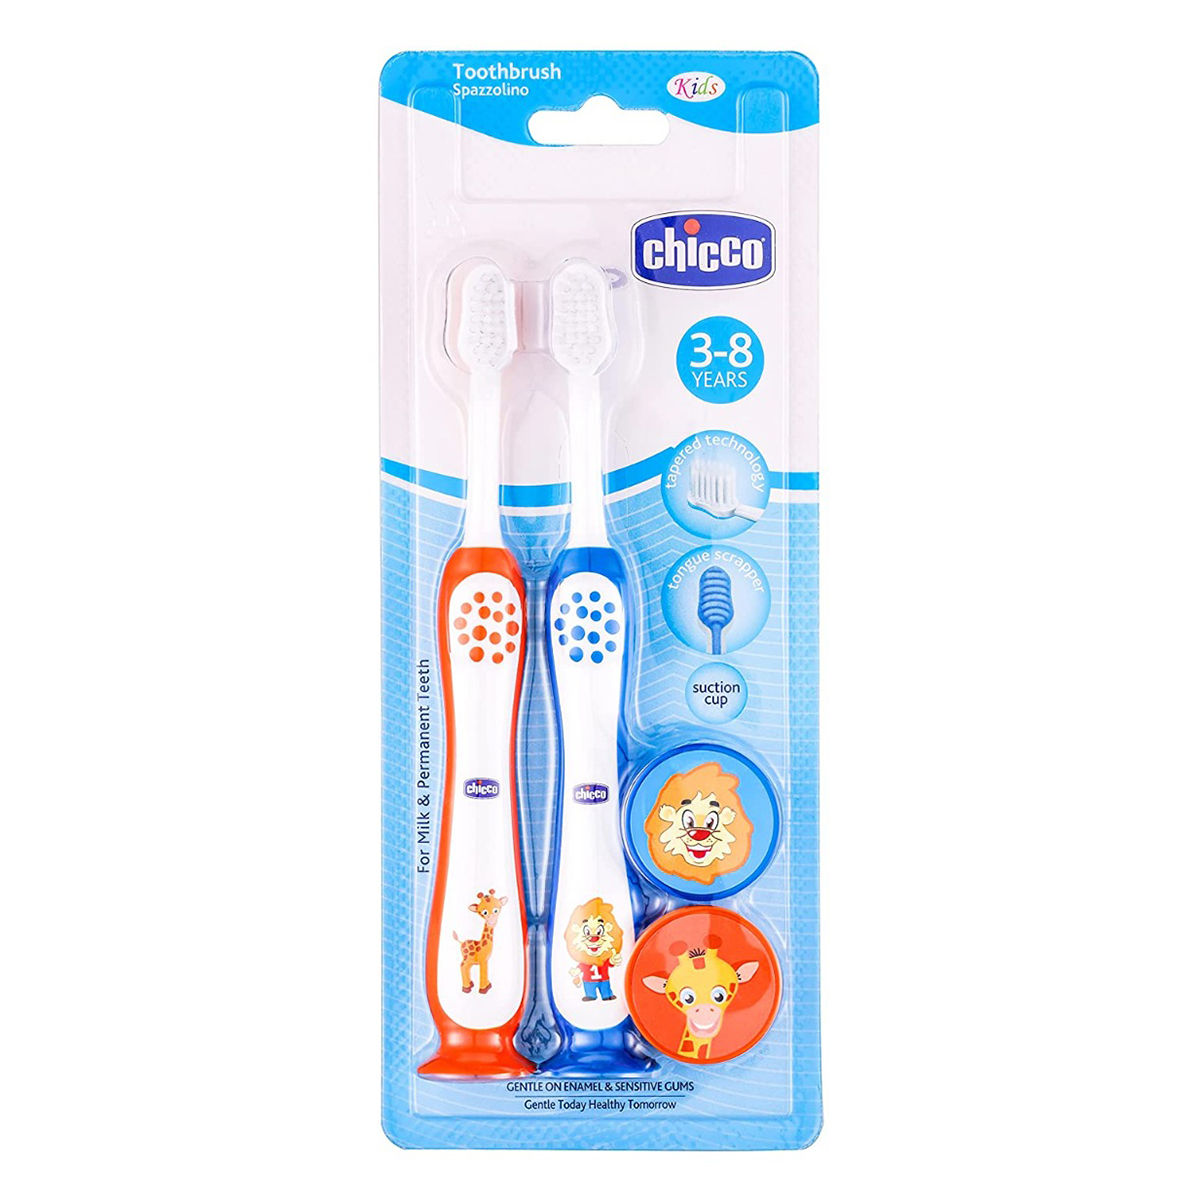 Buy Chicco Soft Blue & Orange Toothbrush for 3-8 Year Kids, 2 Count Online